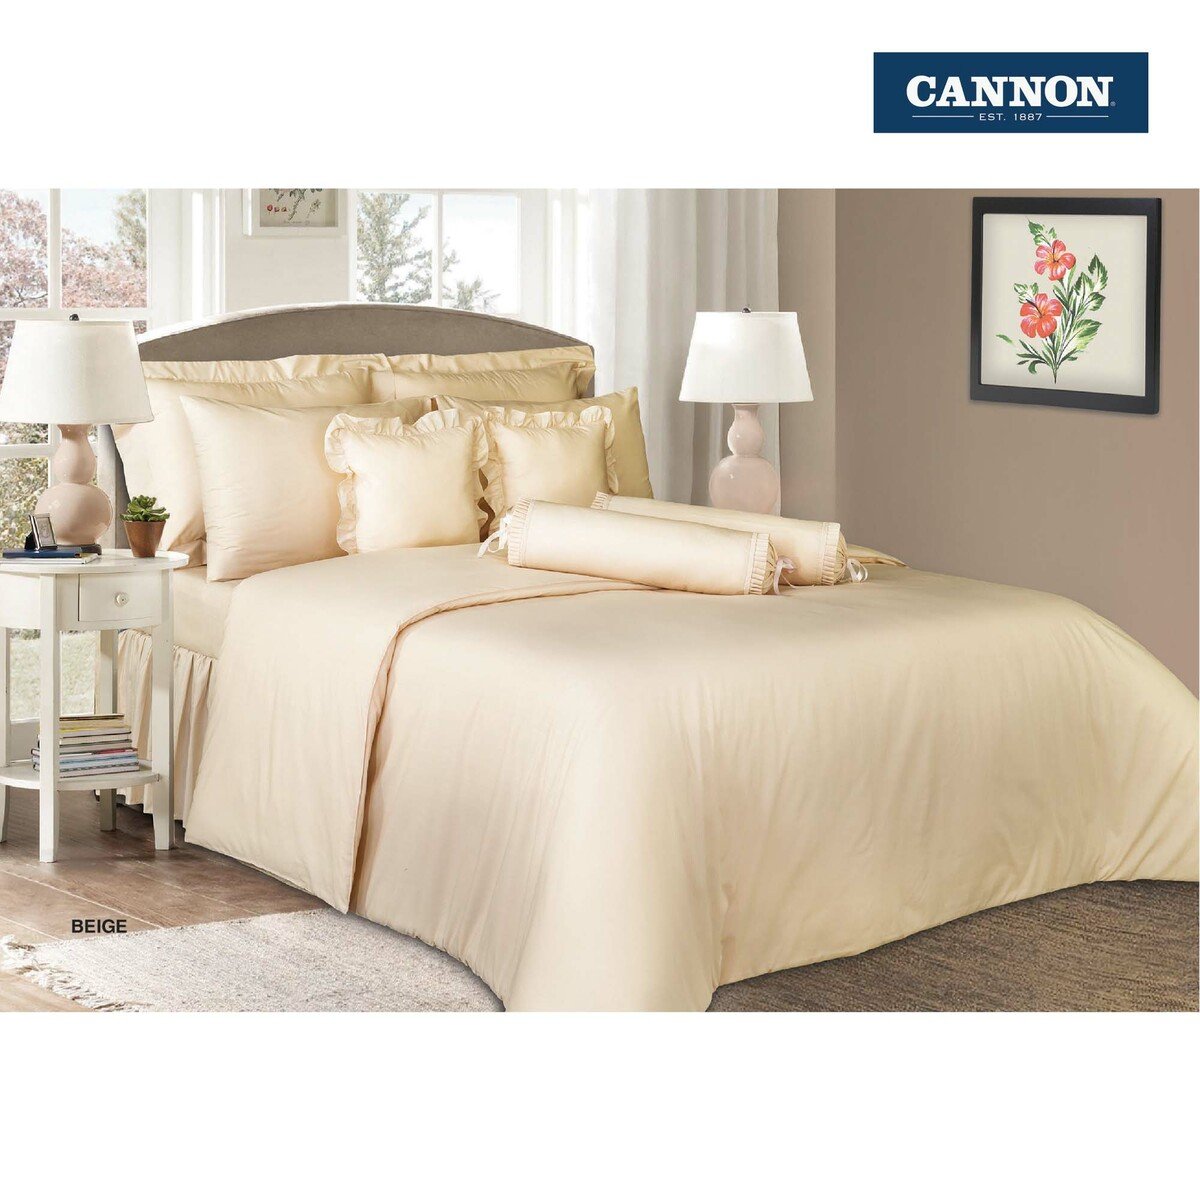 Cannon Fitted Sheet + Pillow Cover Plain Single Size 120x200cm Beige